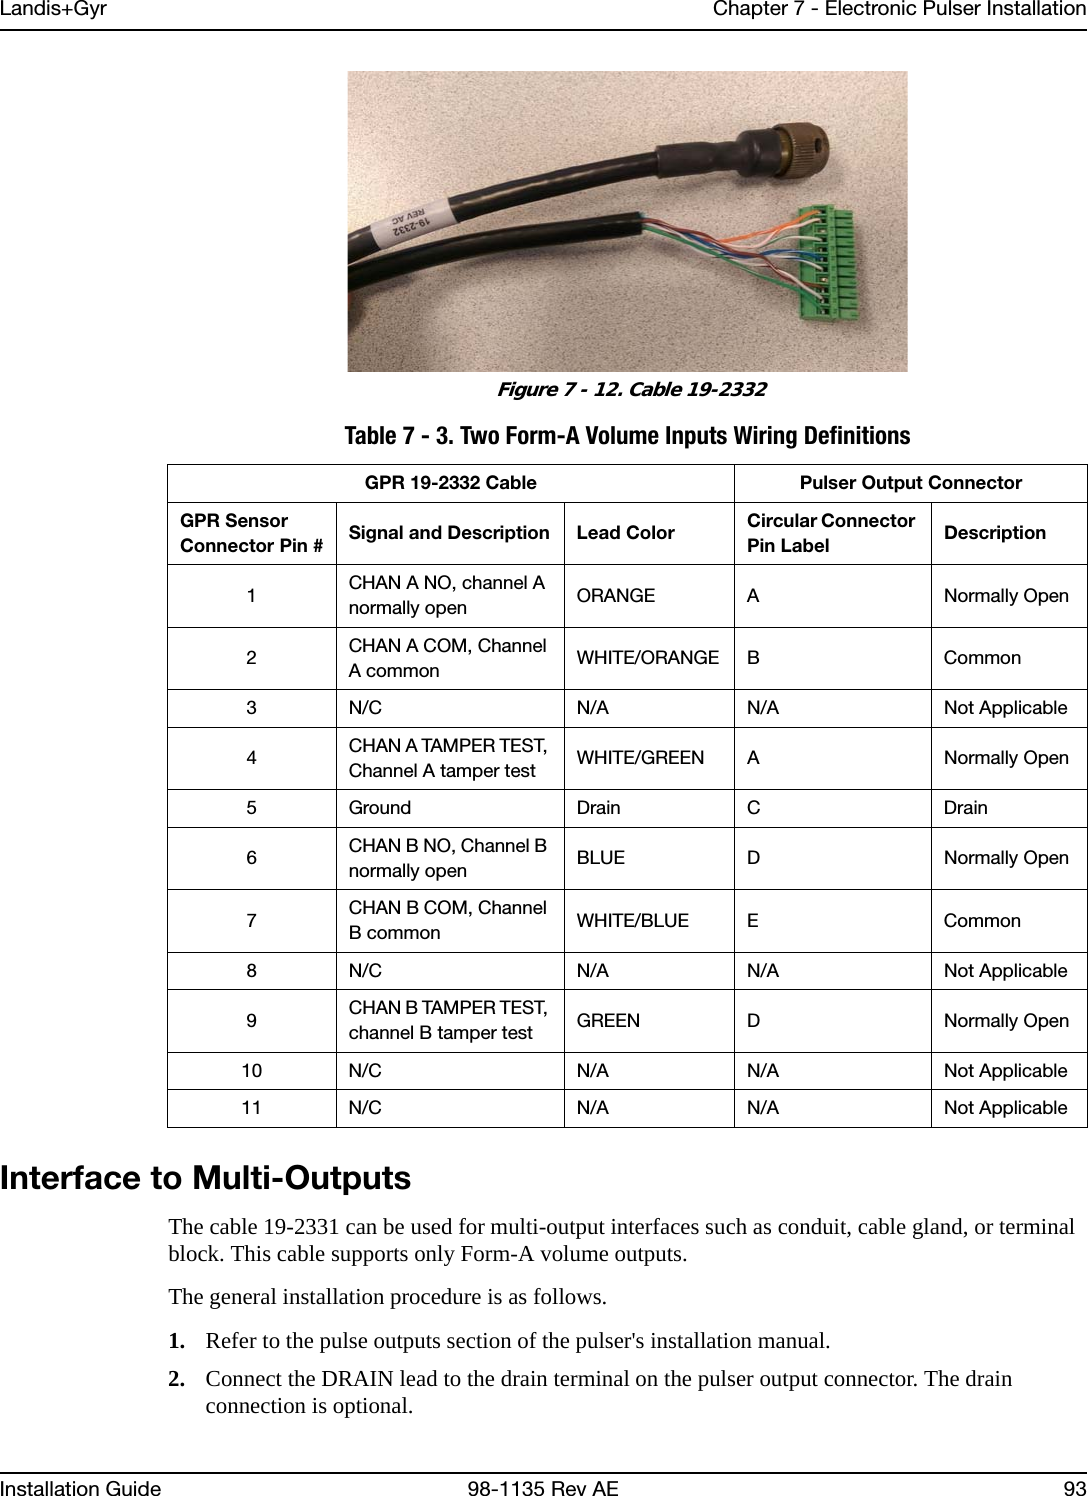 Landis+Gyr Chapter 7 - Electronic Pulser InstallationInstallation Guide 98-1135 Rev AE 93 Figure 7 - 12. Cable 19-2332Interface to Multi-OutputsThe cable 19-2331 can be used for multi-output interfaces such as conduit, cable gland, or terminal block. This cable supports only Form-A volume outputs.The general installation procedure is as follows.1. Refer to the pulse outputs section of the pulser&apos;s installation manual.2. Connect the DRAIN lead to the drain terminal on the pulser output connector. The drain connection is optional.Table 7 - 3. Two Form-A Volume Inputs Wiring DefinitionsGPR 19-2332 Cable Pulser Output ConnectorGPR Sensor Connector Pin # Signal and Description Lead Color Circular Connector Pin Label Description1CHAN A NO, channel A normally open ORANGE A Normally Open2CHAN A COM, Channel A common WHITE/ORANGE B Common3 N/C N/A N/A Not Applicable4CHAN A TAMPER TEST, Channel A tamper test WHITE/GREEN A Normally Open5 Ground Drain C Drain6CHAN B NO, Channel B normally open BLUE D Normally Open7CHAN B COM, Channel B common WHITE/BLUE E Common8 N/C N/A N/A Not Applicable9CHAN B TAMPER TEST, channel B tamper test GREEN D Normally Open10 N/C N/A N/A Not Applicable11 N/C N/A N/A Not Applicable